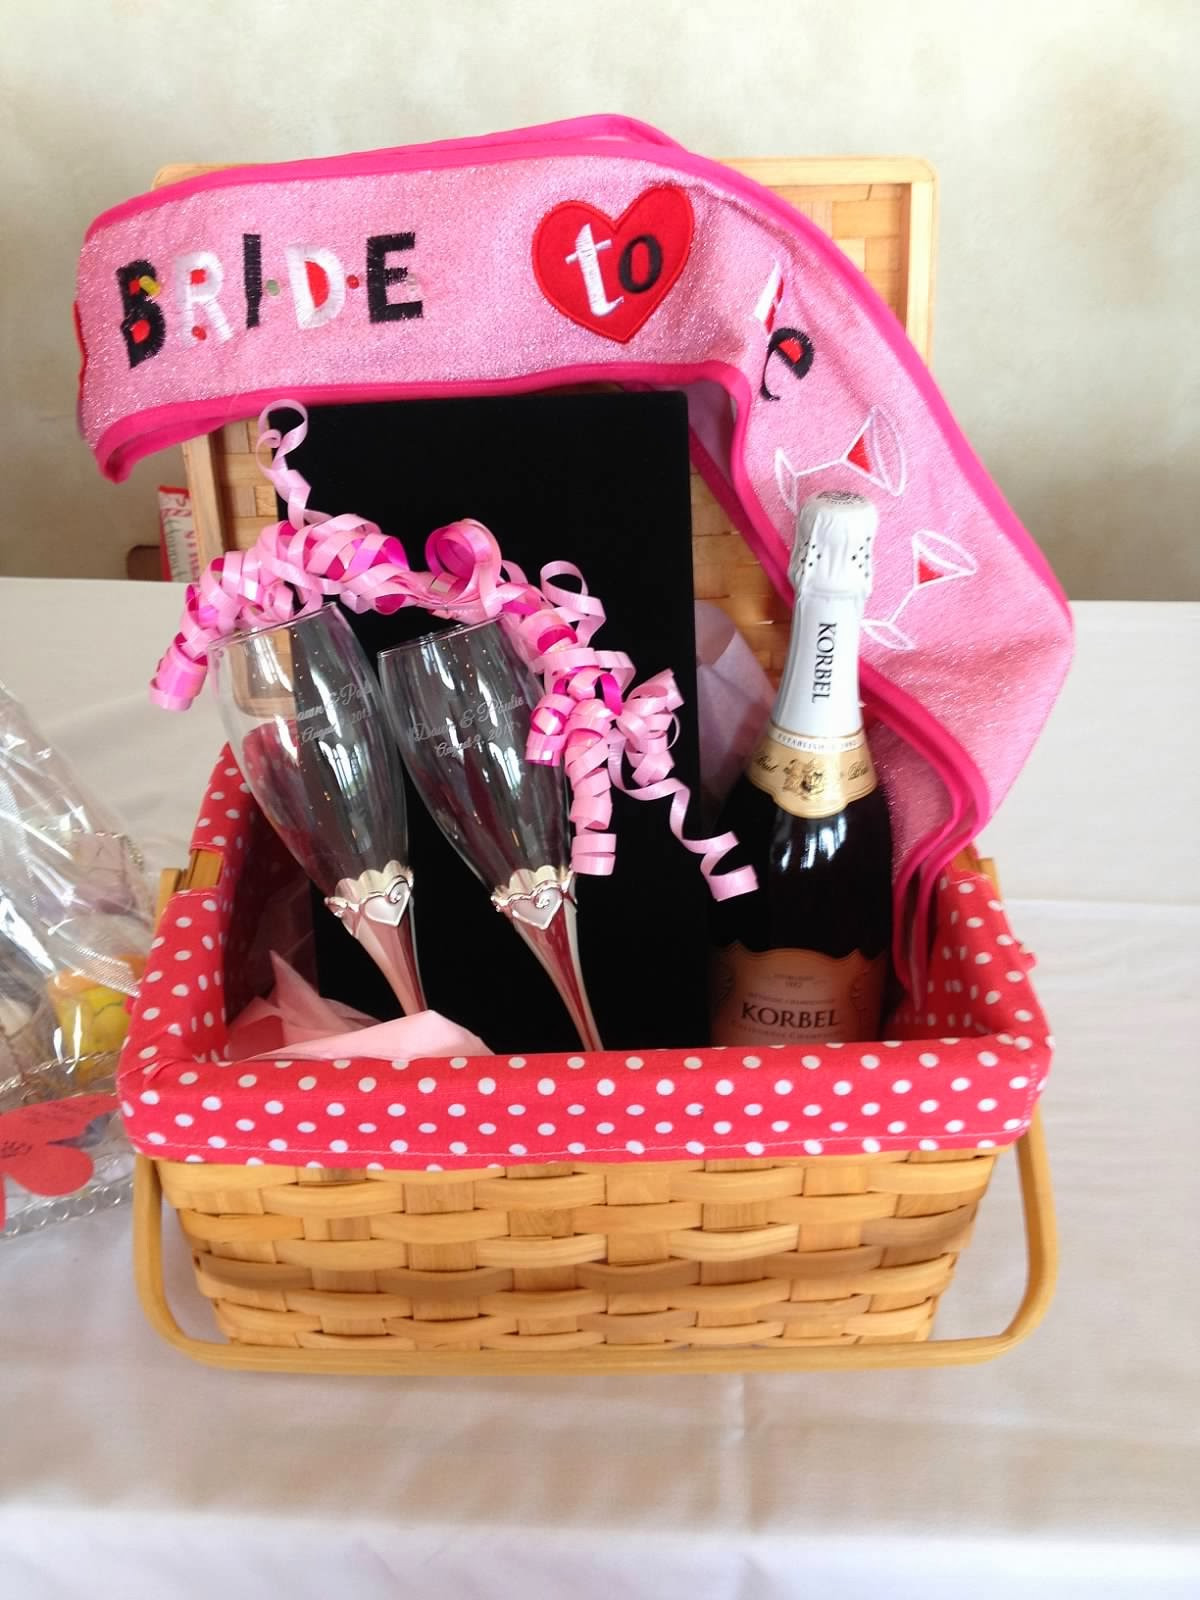 Gift Basket Ideas For Bridal Shower
 2 Girls 1 Year 730 Moments to Wedding Wednesdays